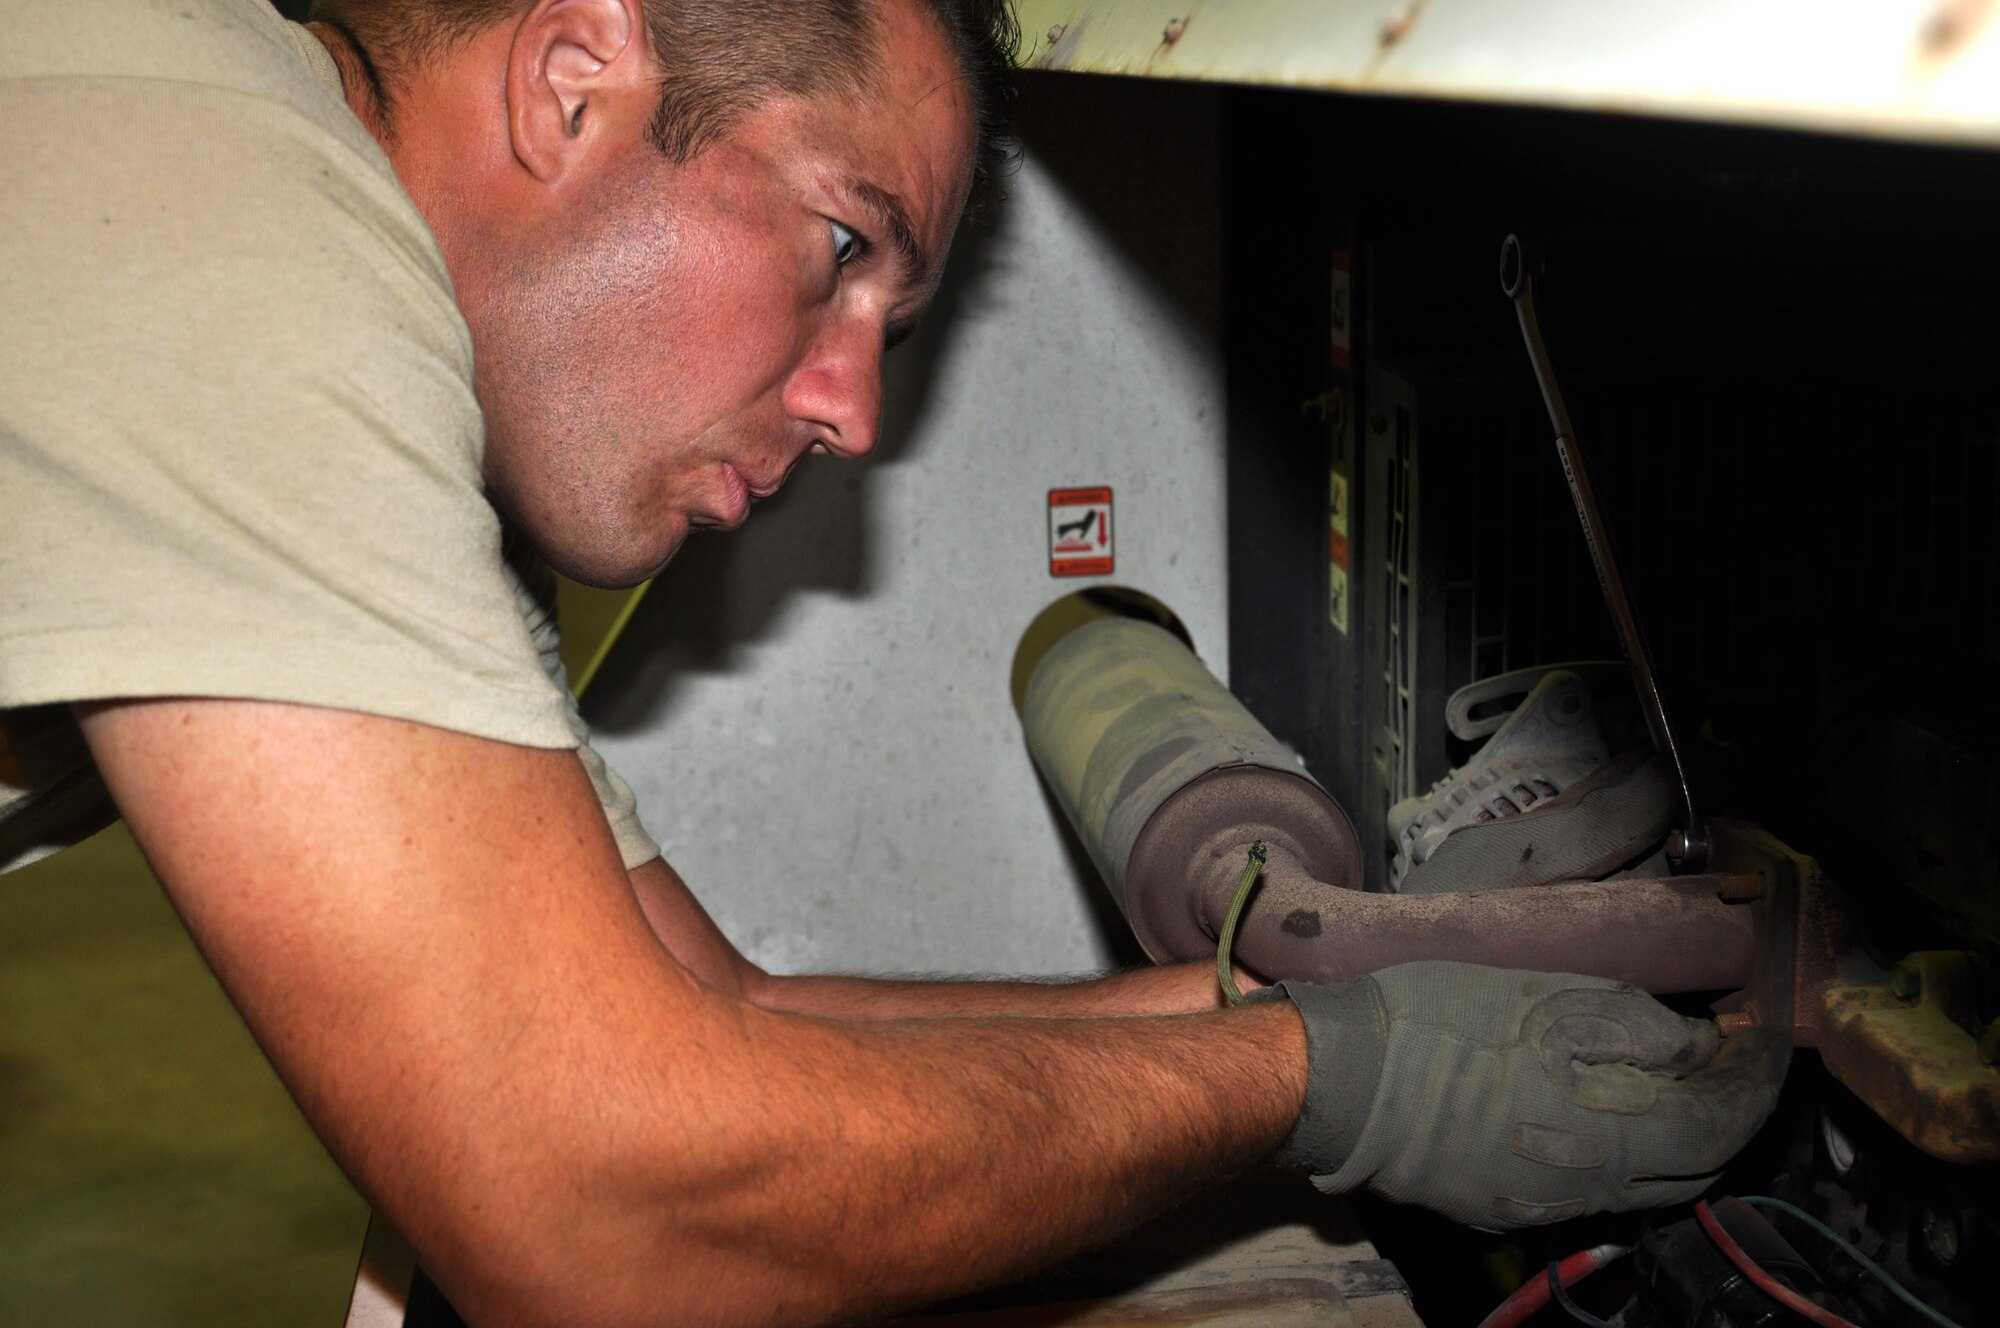 Staff Sergeant Jordan LeMay, the 386th Expeditionary Civil Engineer Squadron NCO in charge of light carts, loosens a rusted exhaust manifold bolt during a light cart teardown at the 386 ECES Power Production facility Wednesday, May 17, 2017.  This cart was being converted to run off of the base power grid. (U.S. Air Force photo/Master Sgt. Eric Sharman)